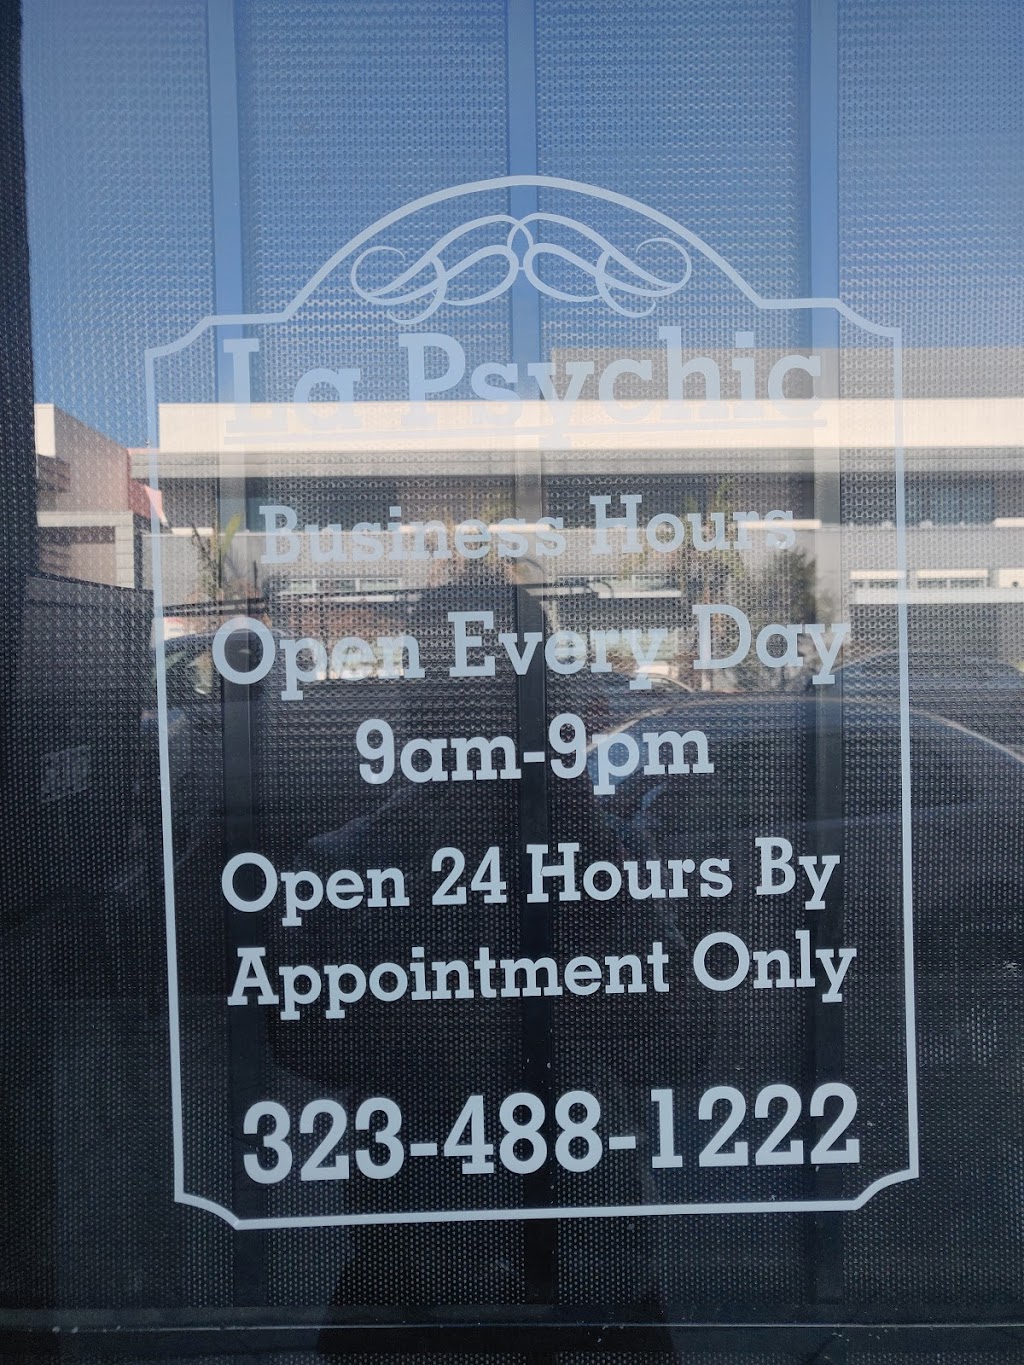 8th st psychic consult | 3182 W 8th St, Los Angeles, CA 90005, USA | Phone: (323) 488-1222